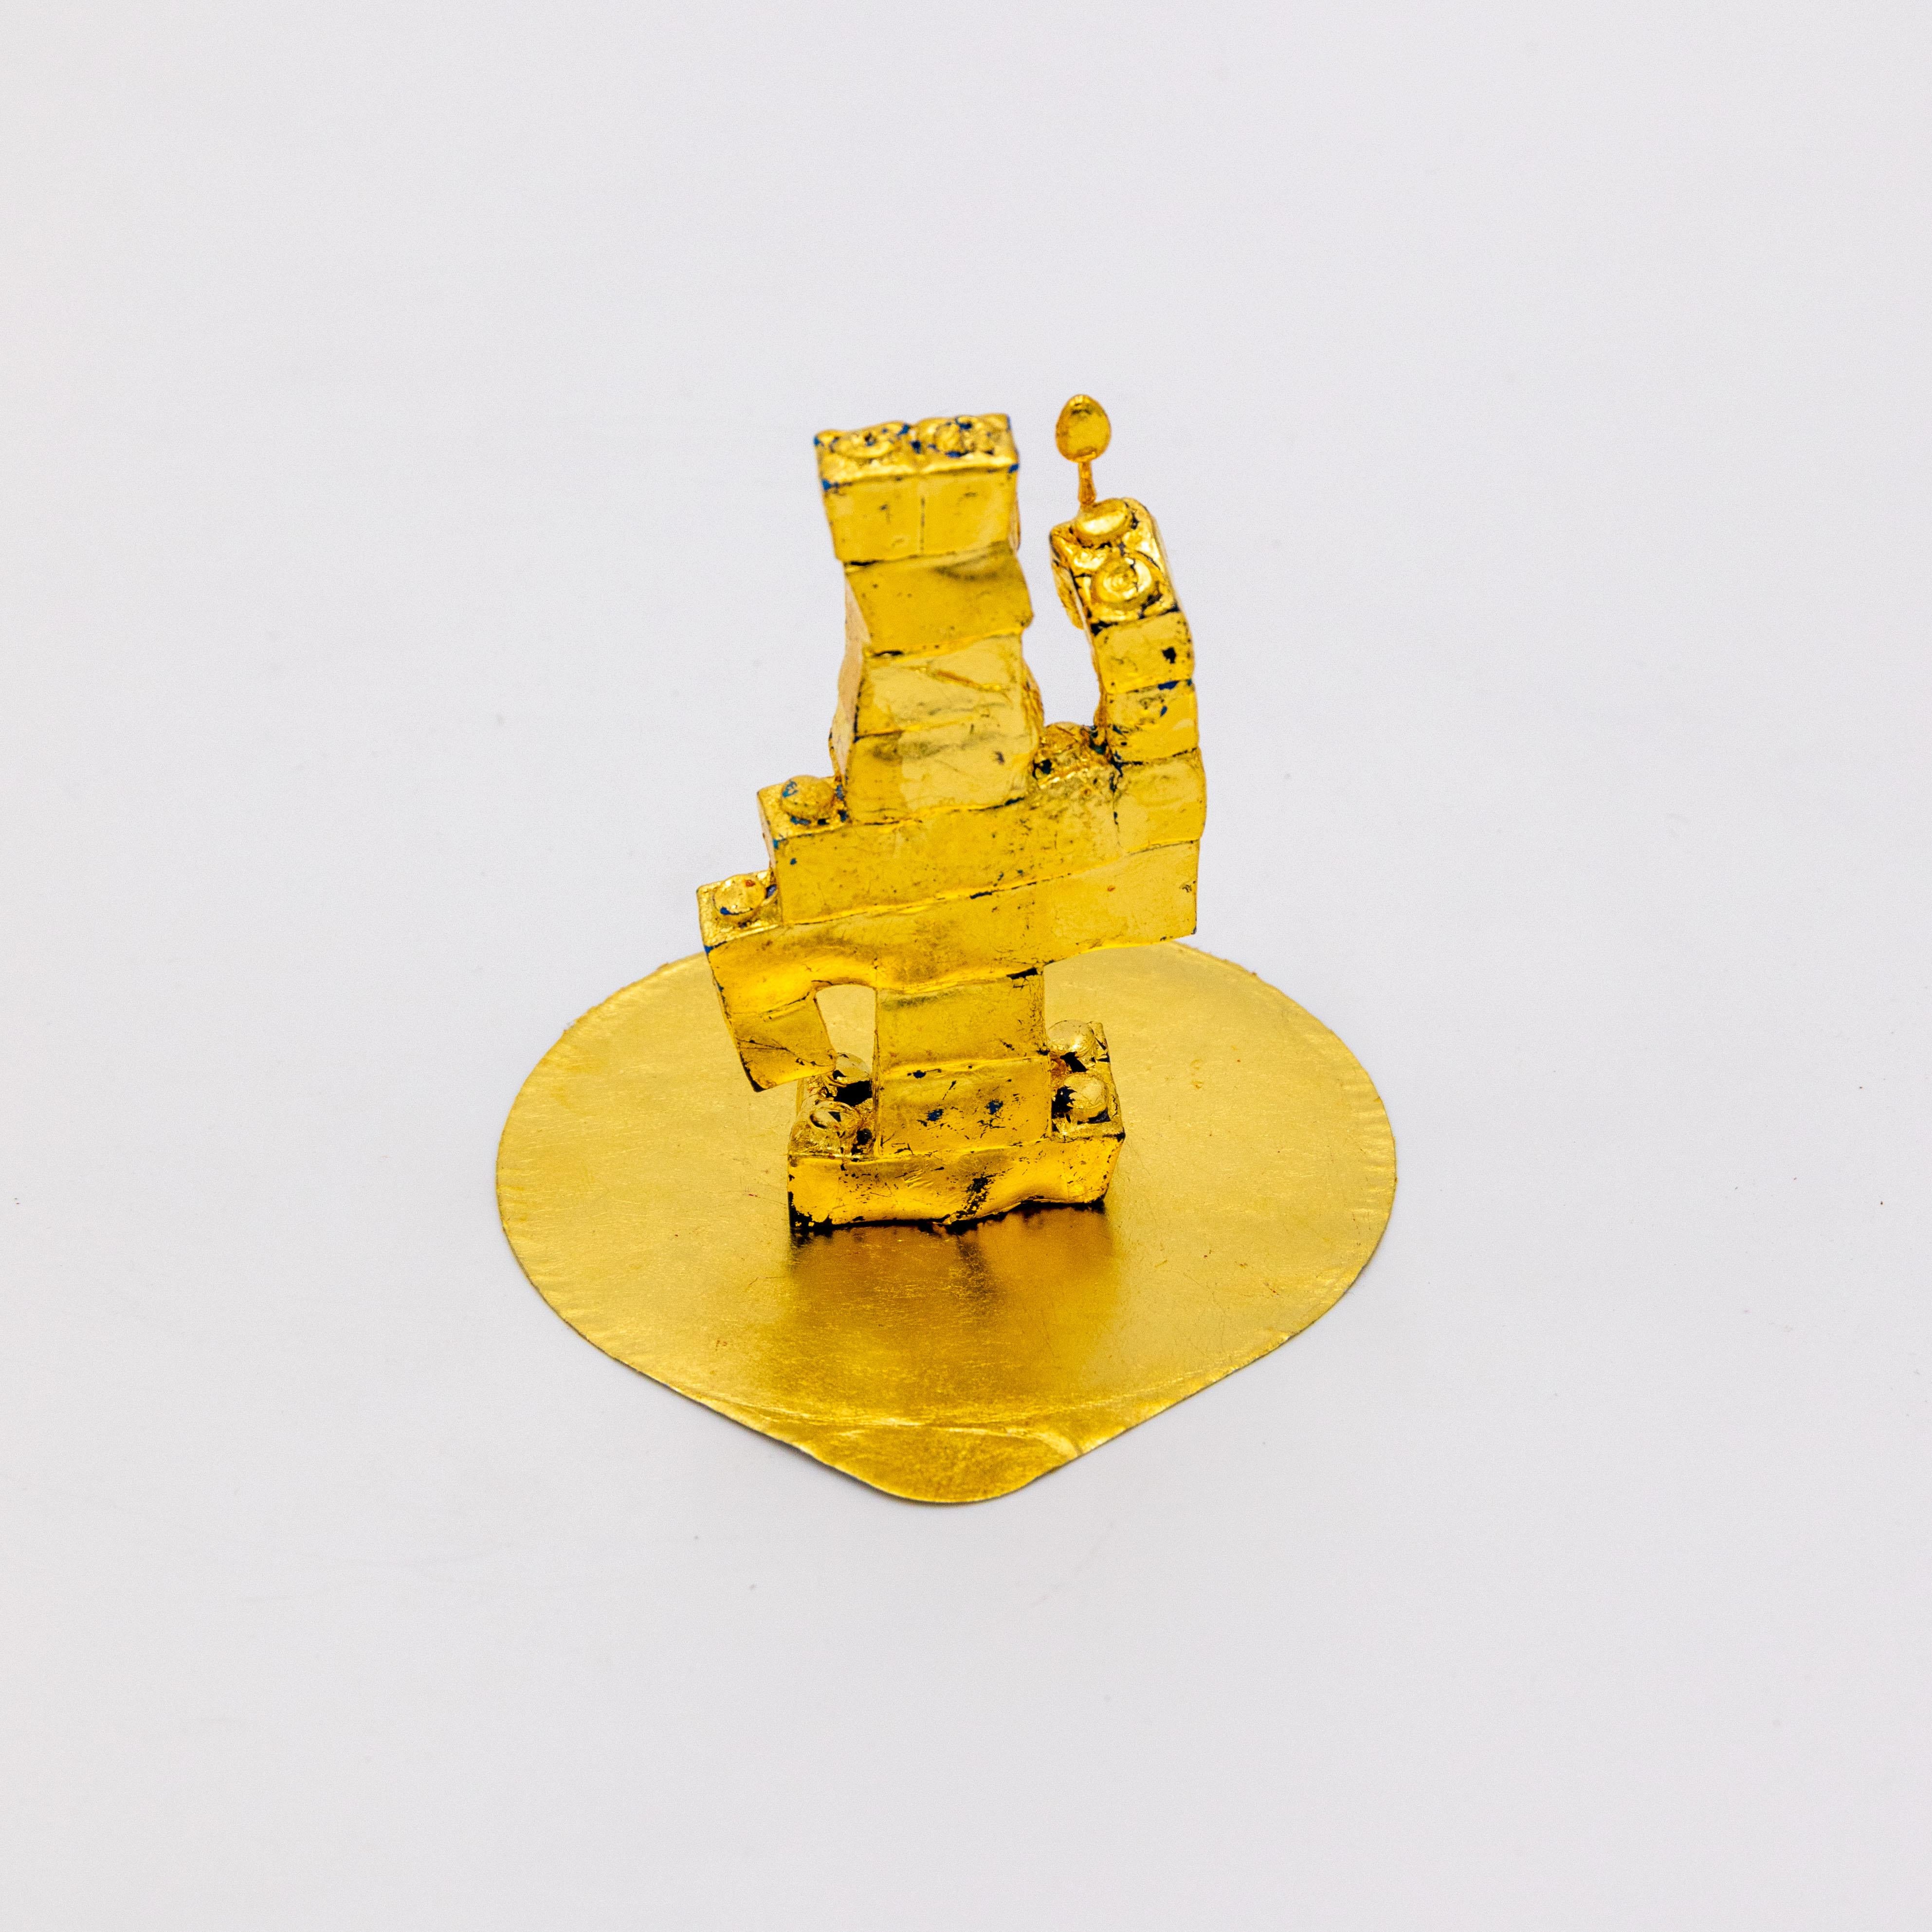 Lego, plastic model, gold leaf, noodle, resin, paper, wood
Central piece: W95 × D95 × H195 mm
Side pieces: W80 × D85 × H77 mm

This collaborative work, which began with a common interest in Buddhism, explored the idea of expressing the sacred within